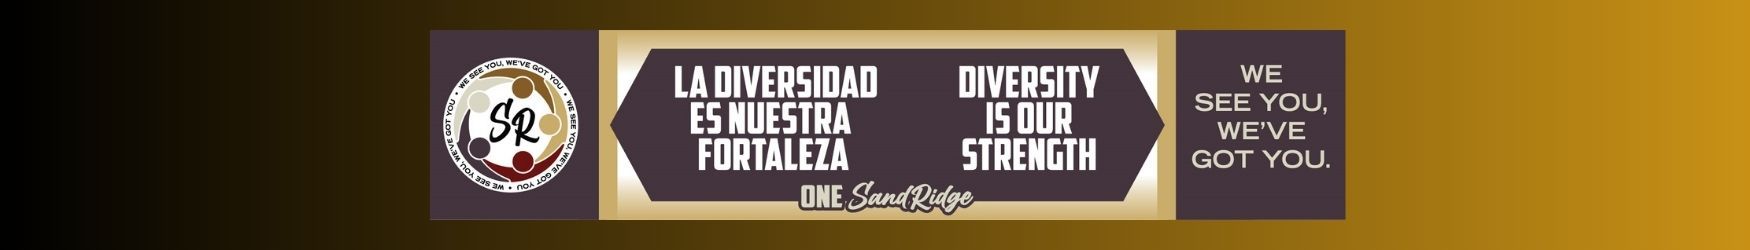 One Sandridge Web Banner Diversity is our strength We See you We got You